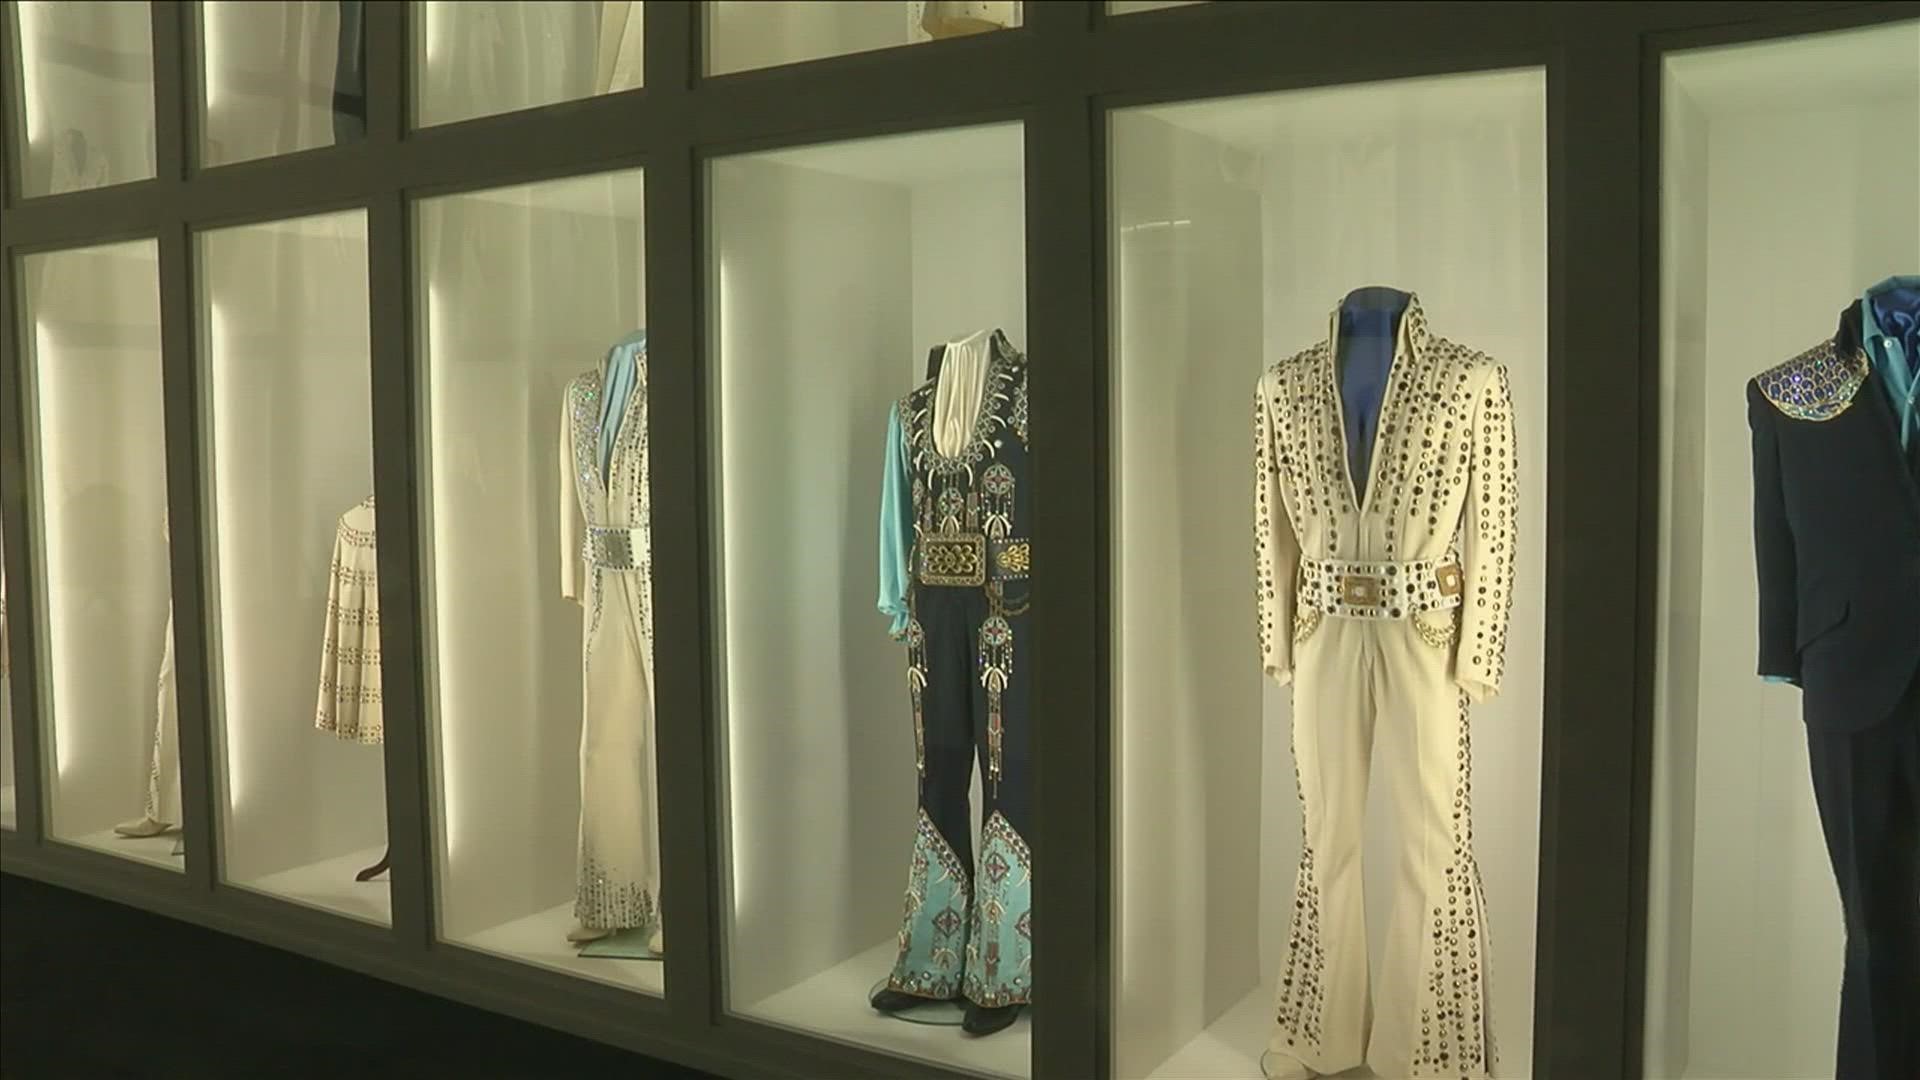 Graceland announced that the limited-time exhibit will include a 21-foot floor to ceiling display of Elvis’ “iconic” costumes.